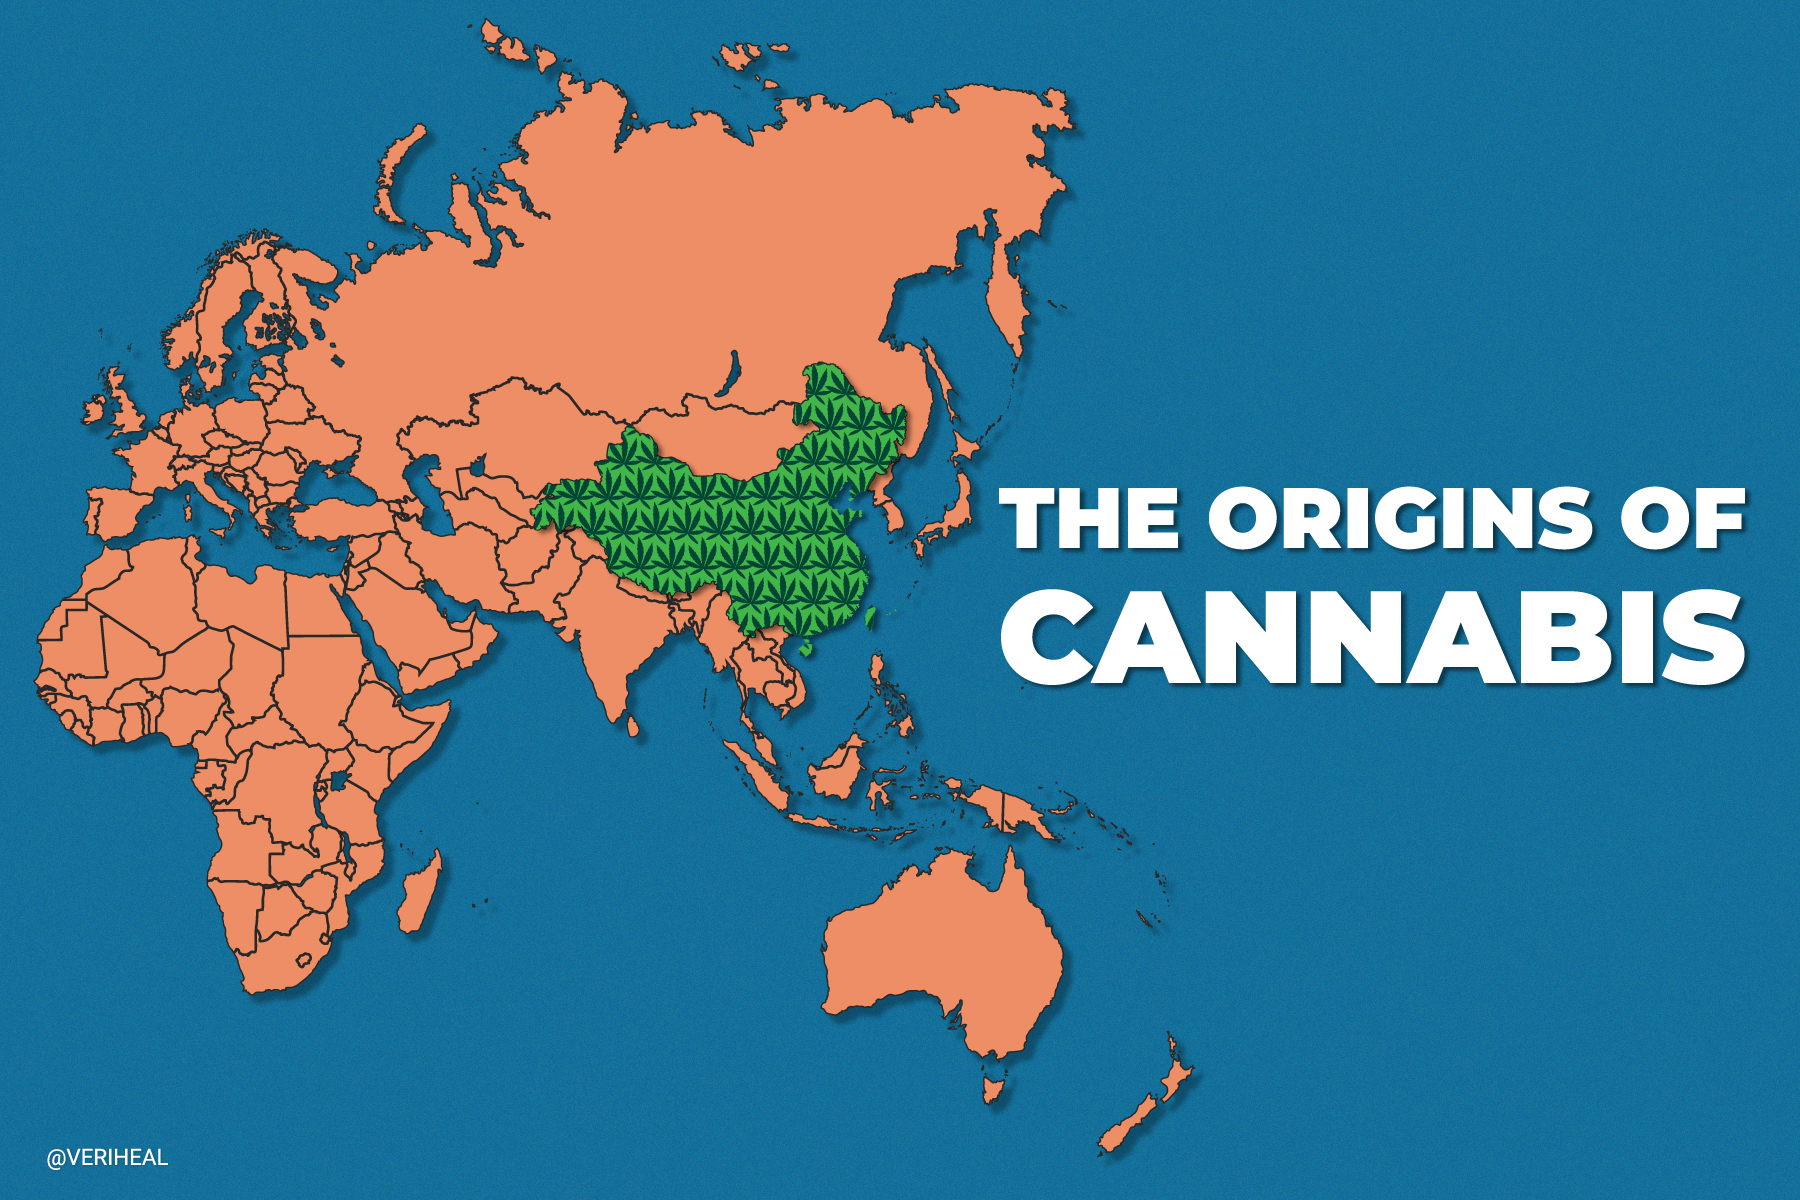 A Study Confirms That the Roots of Cannabis Originate in Northwest China